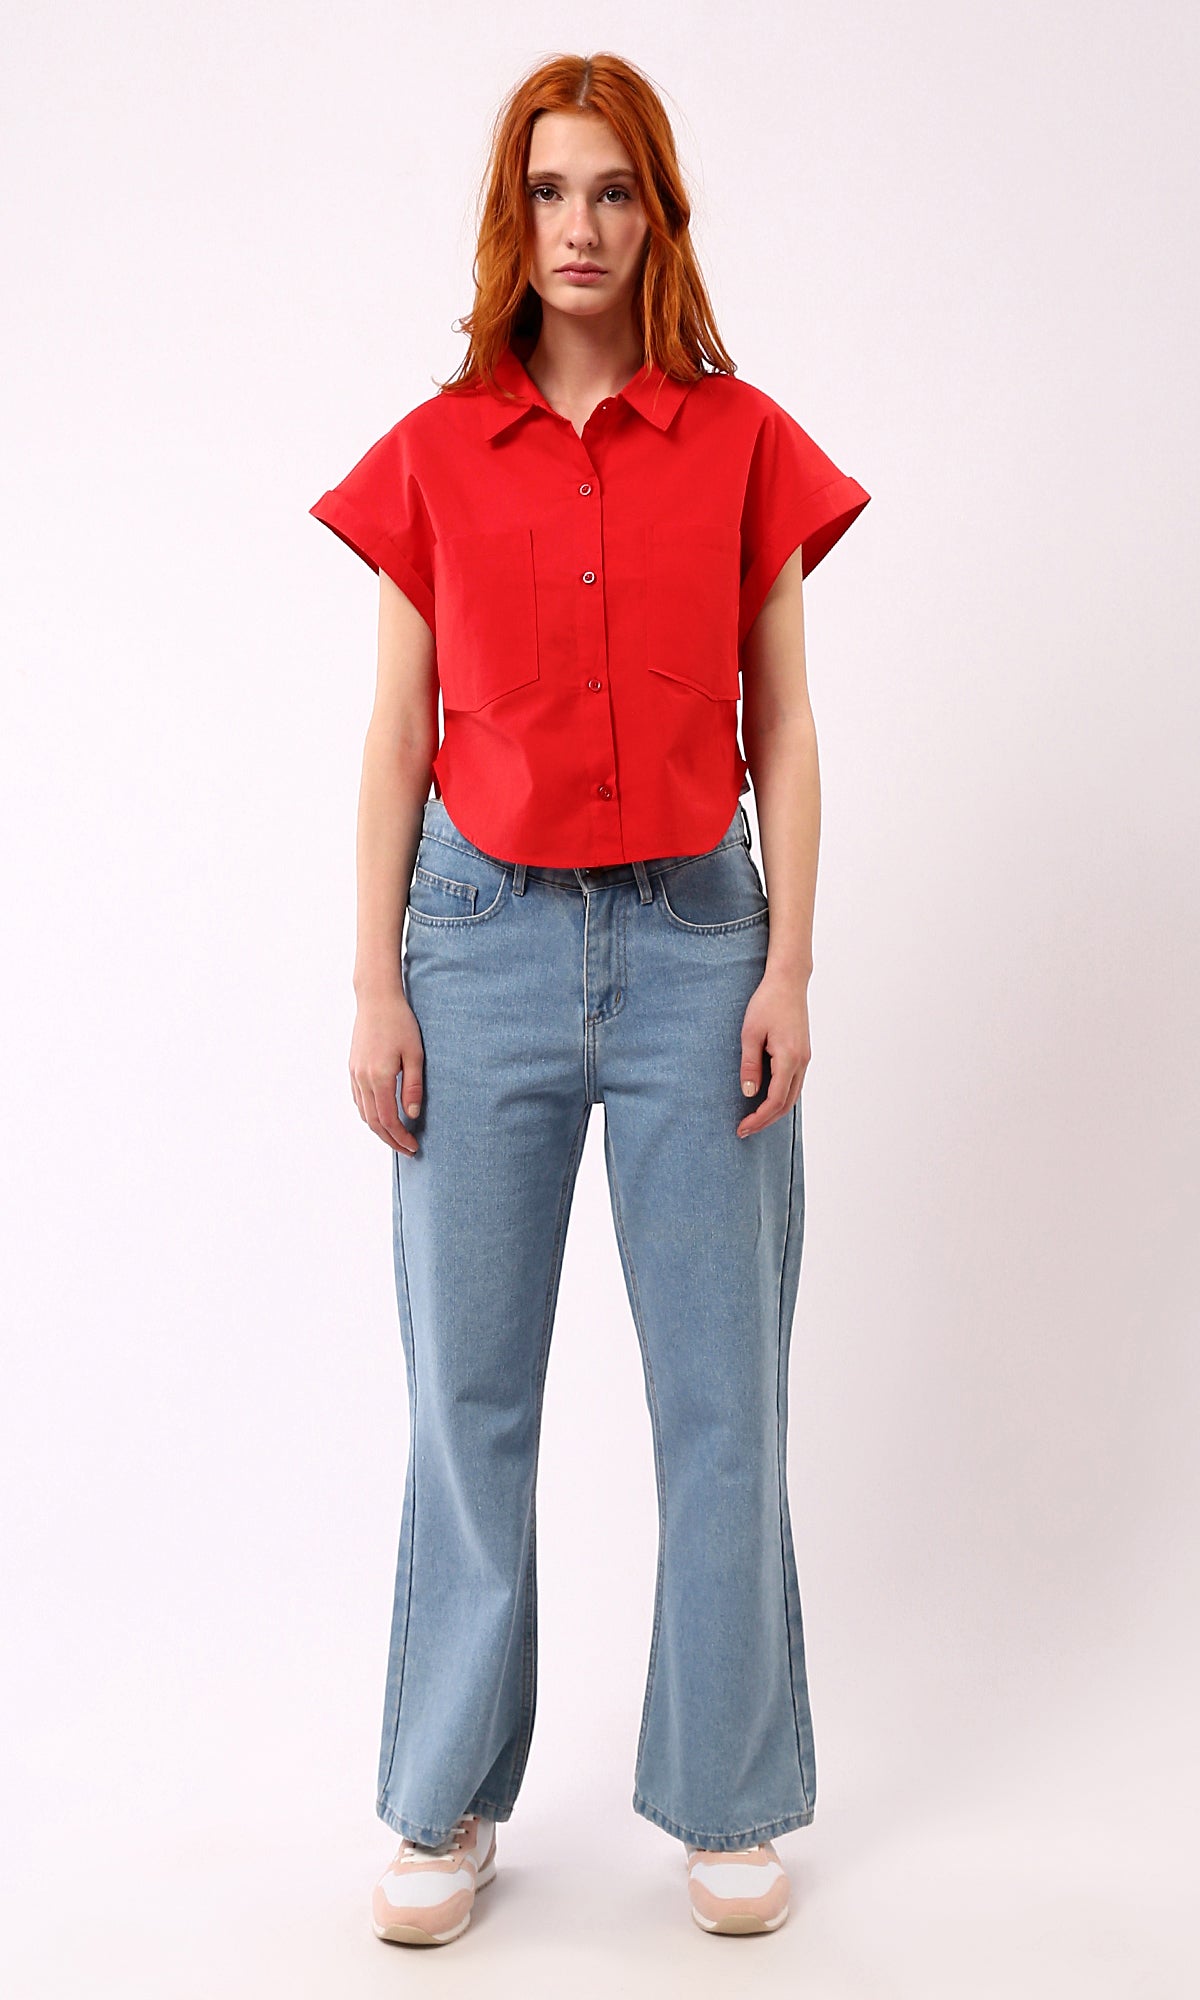 O181644 Solid Short Sleeves Casual Red Buttoned Shirt